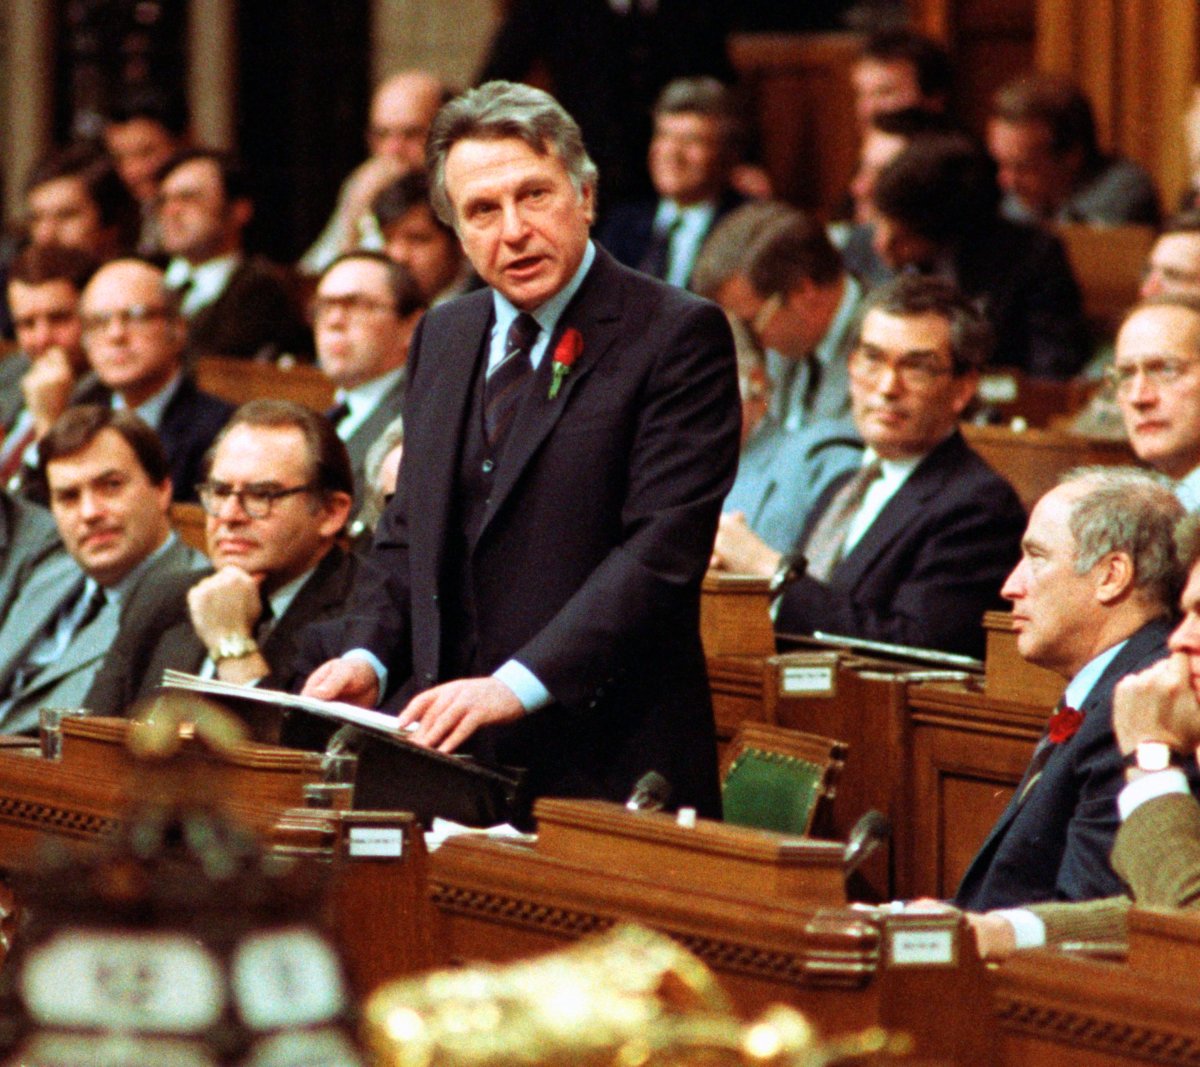 Finance Minister Allan MacEachen in the House of Commons during budget night, Nov 12, 1981. Allan MacEachen, a long-serving Liberal MP and senator from Nova Scotia who was a driving force behind many Canadian social programs, has died at the age of the 96. 